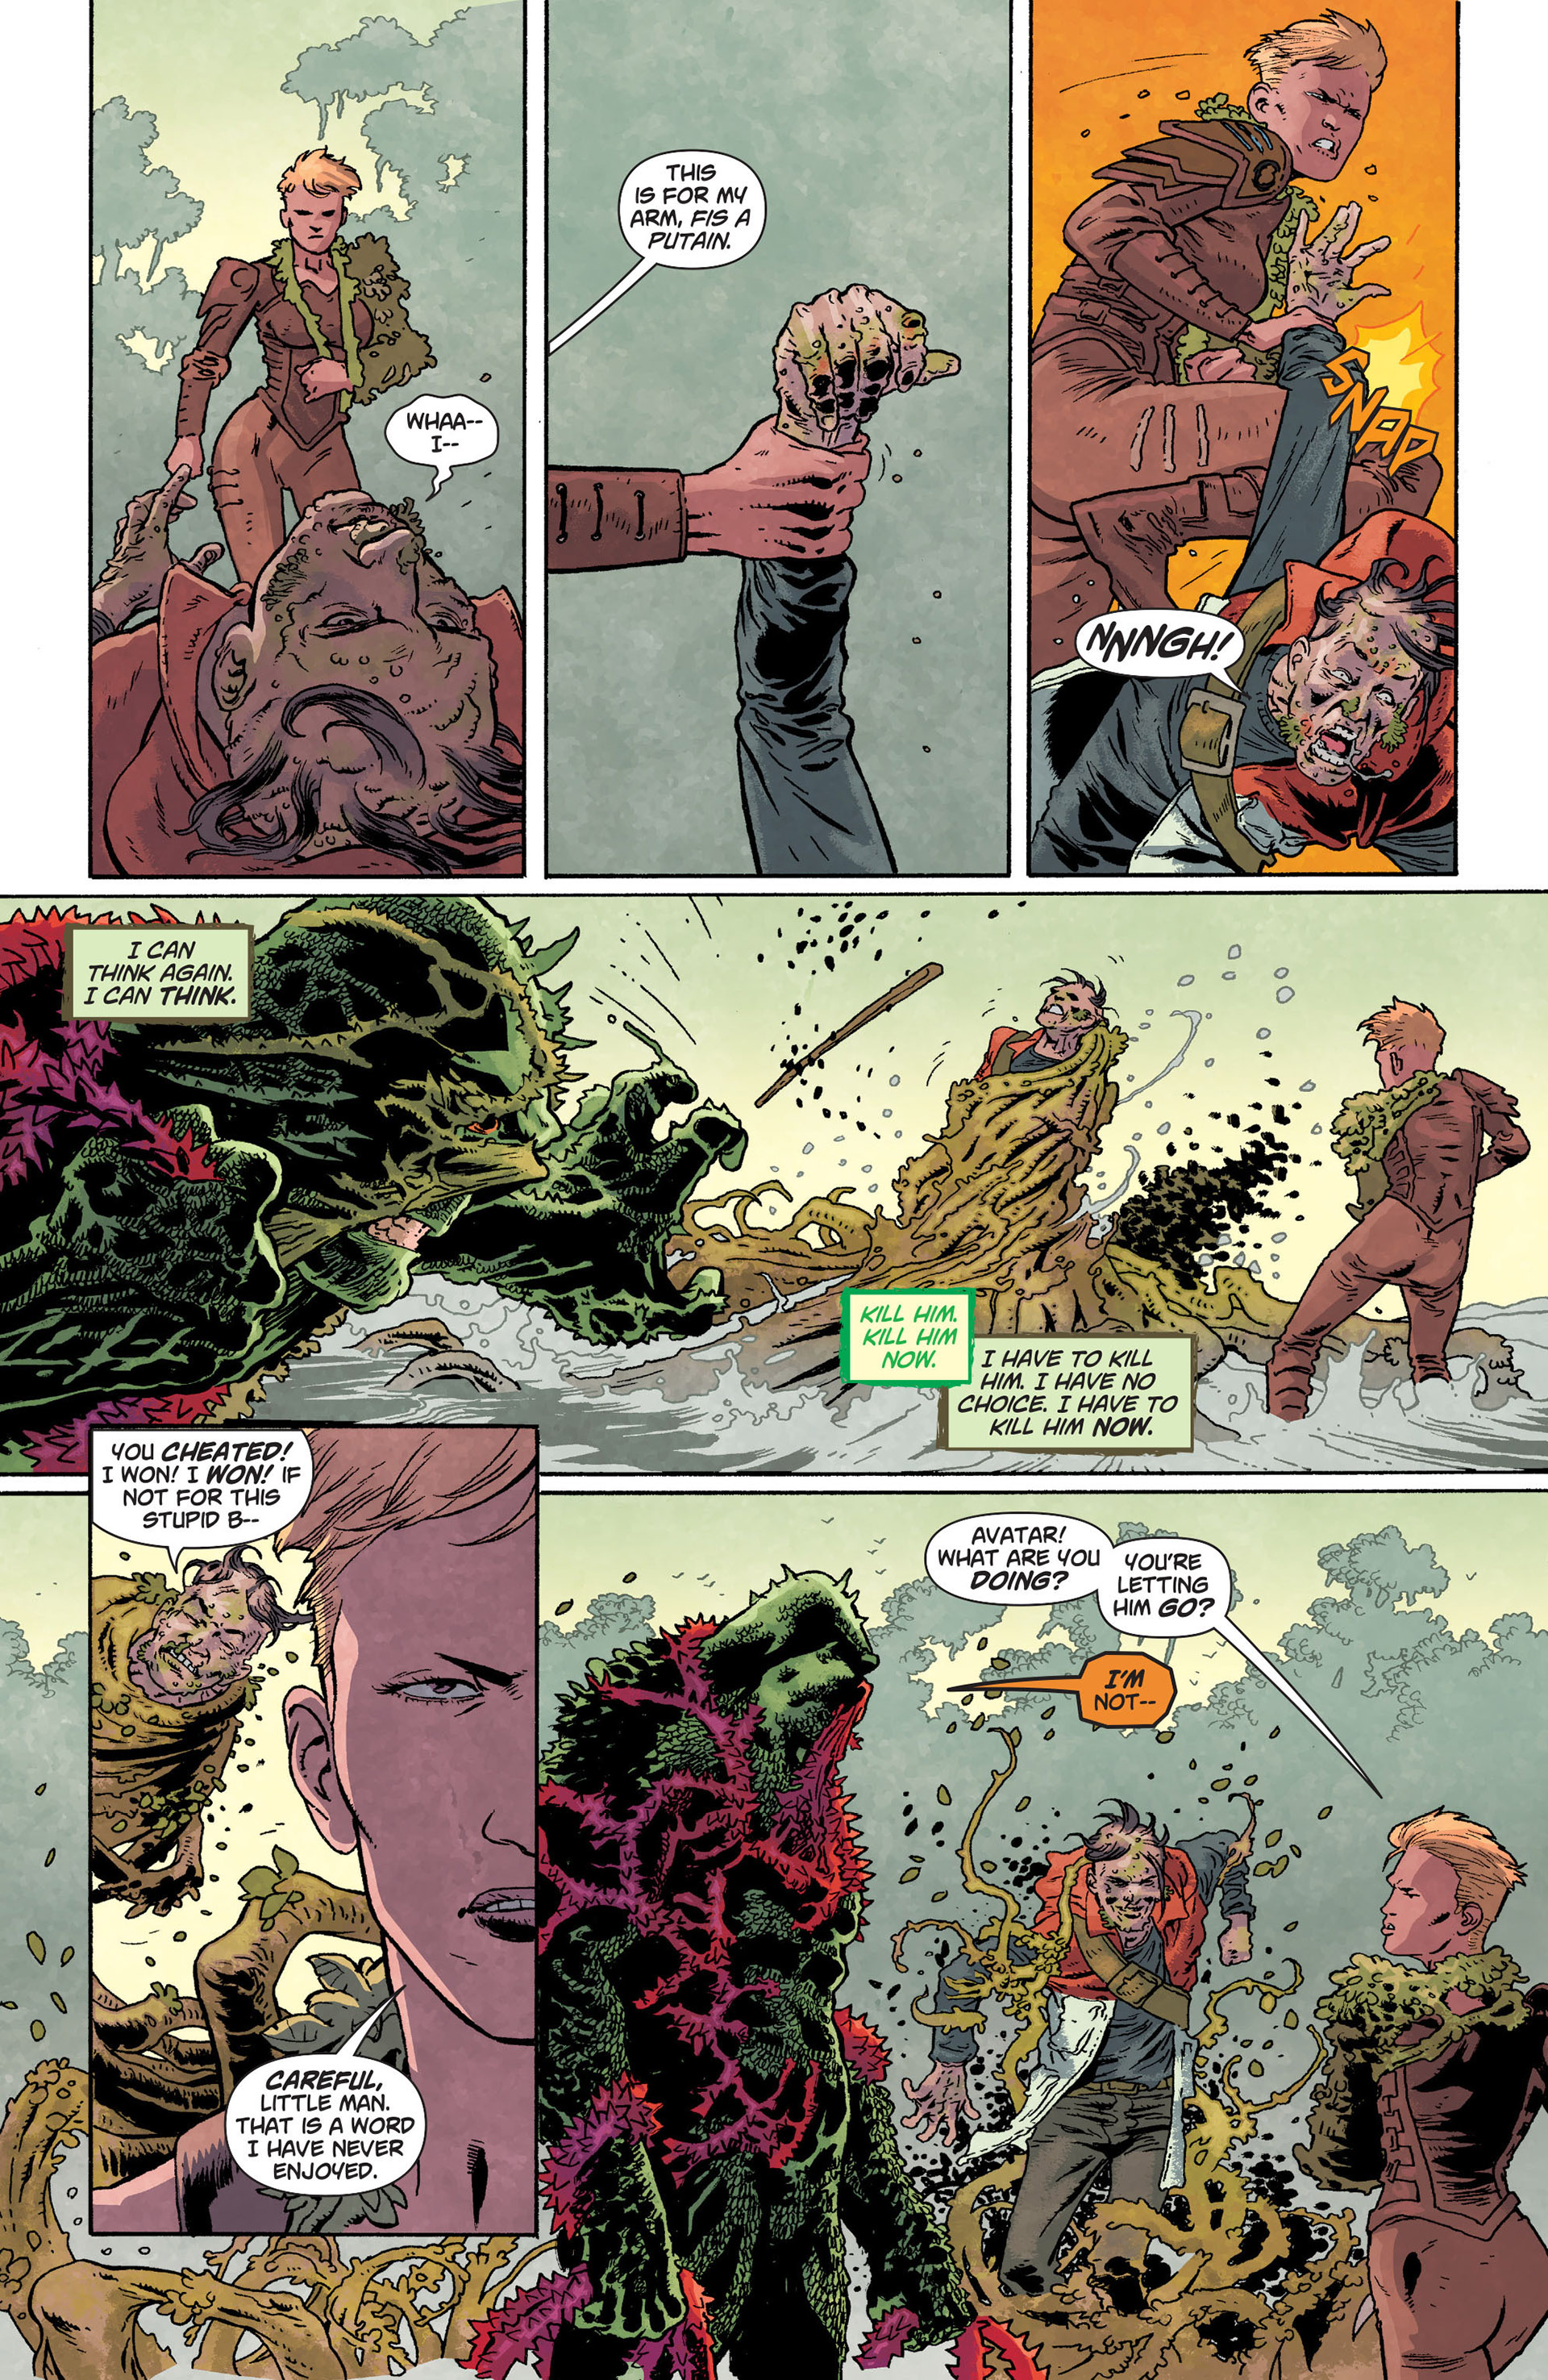 Swamp Thing (2011) 24 Page 18.